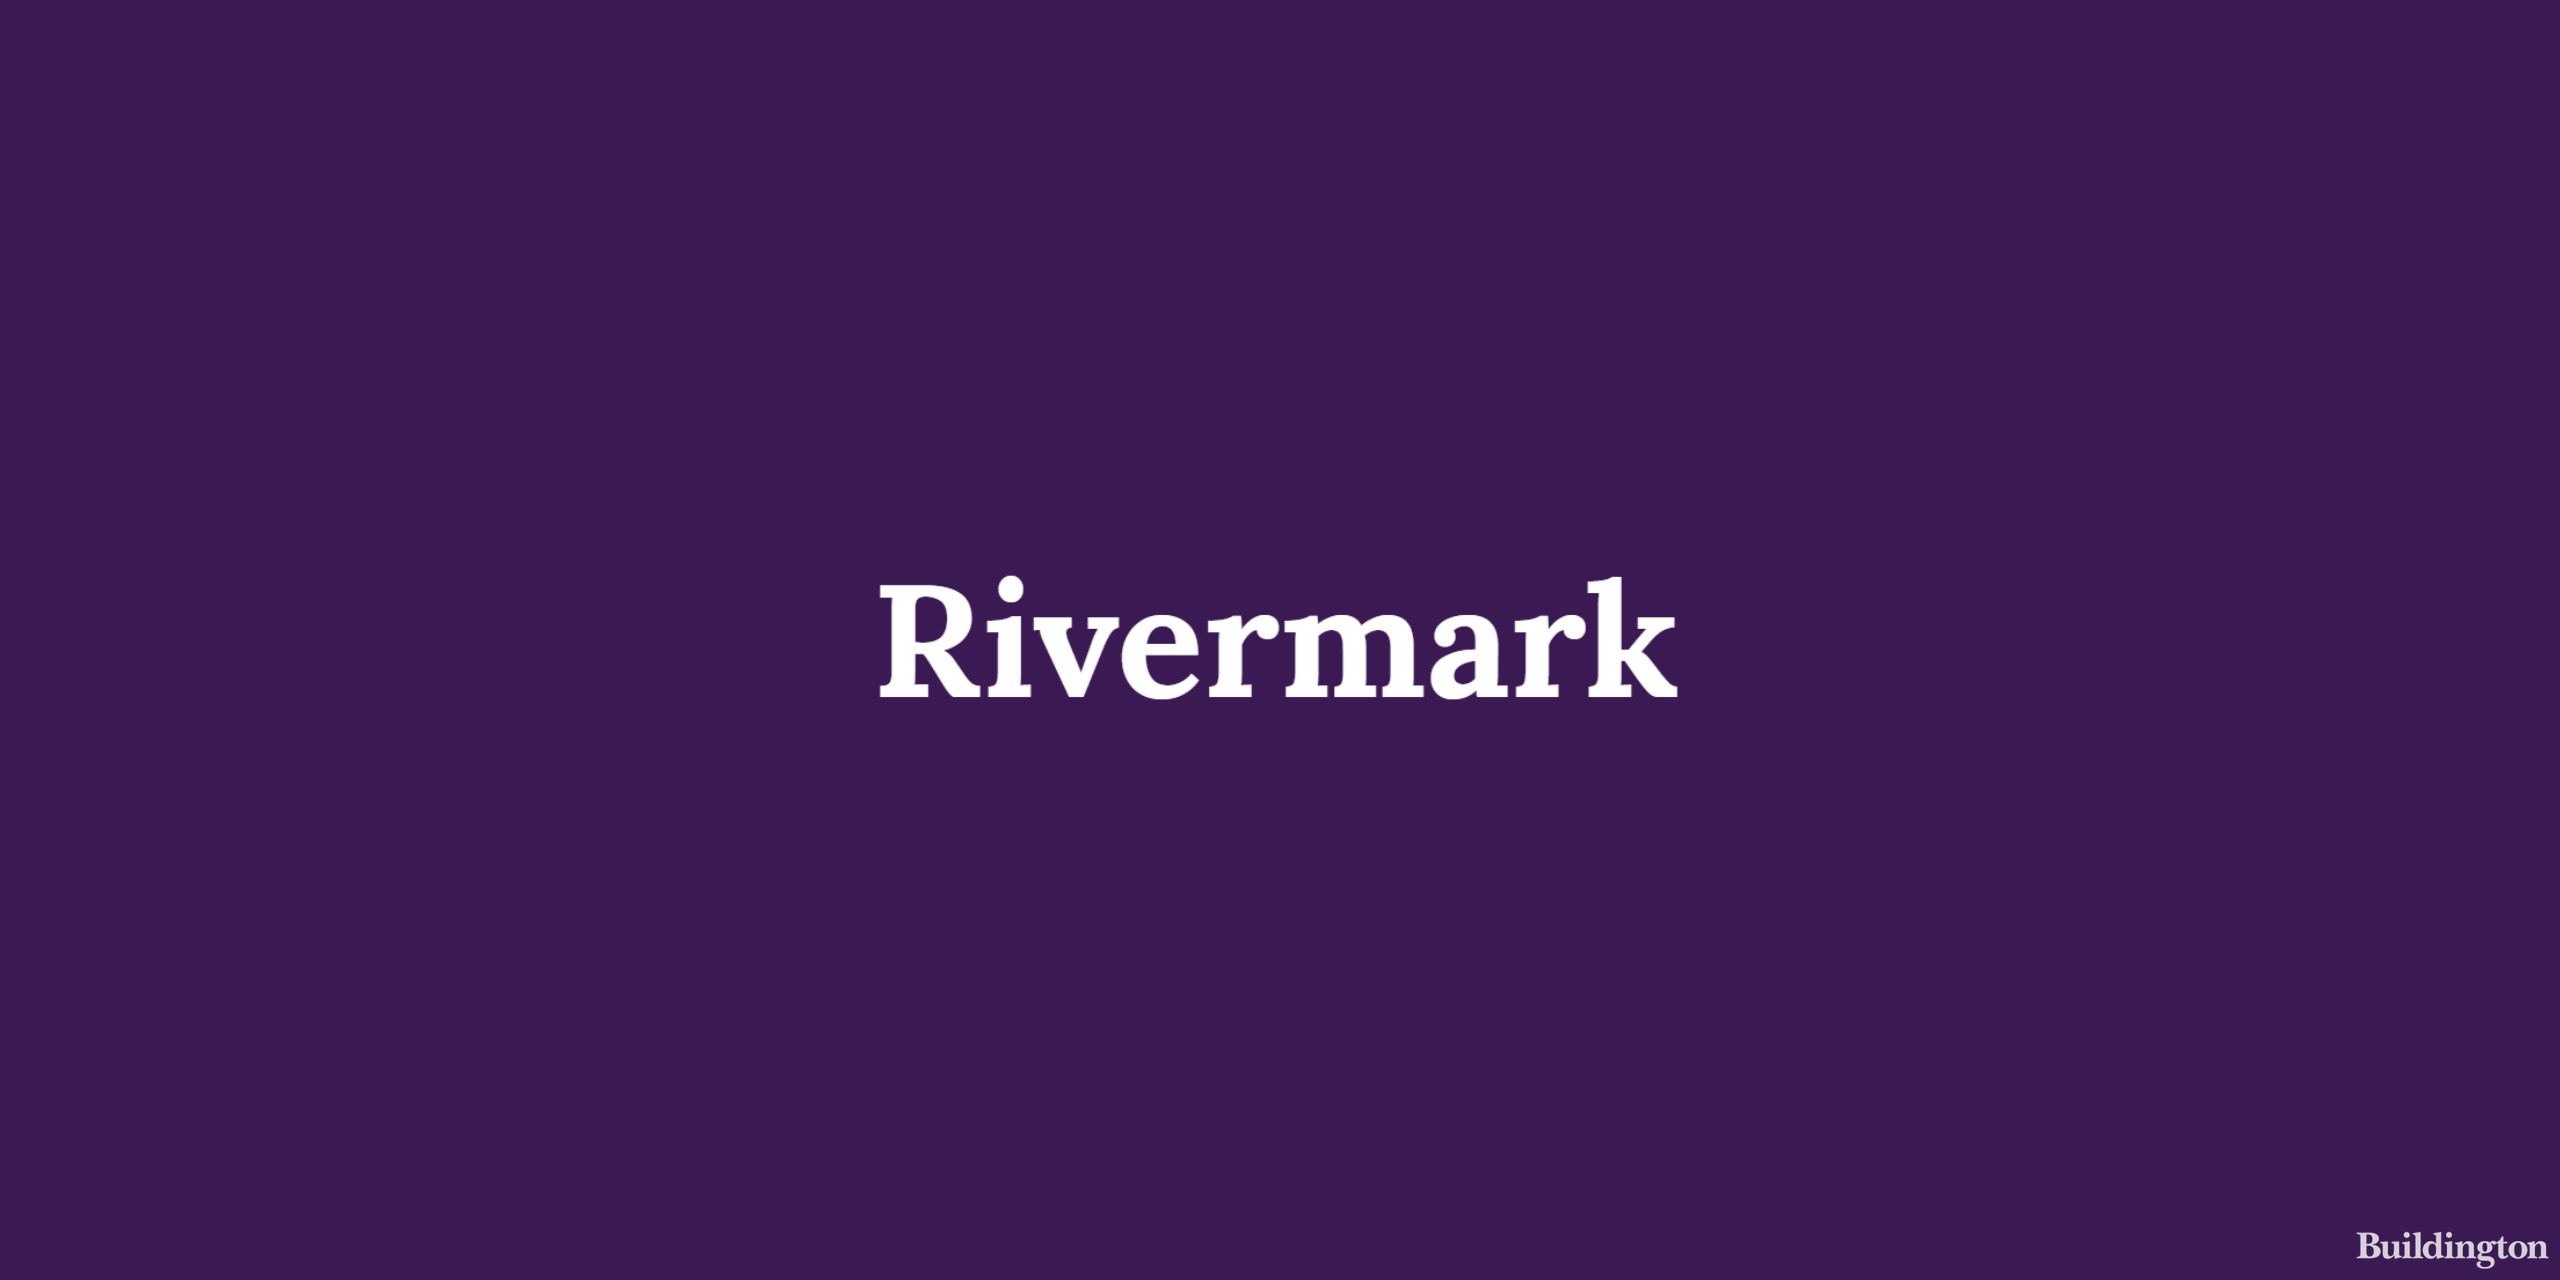 Rivermark development by Taylor Wimpey